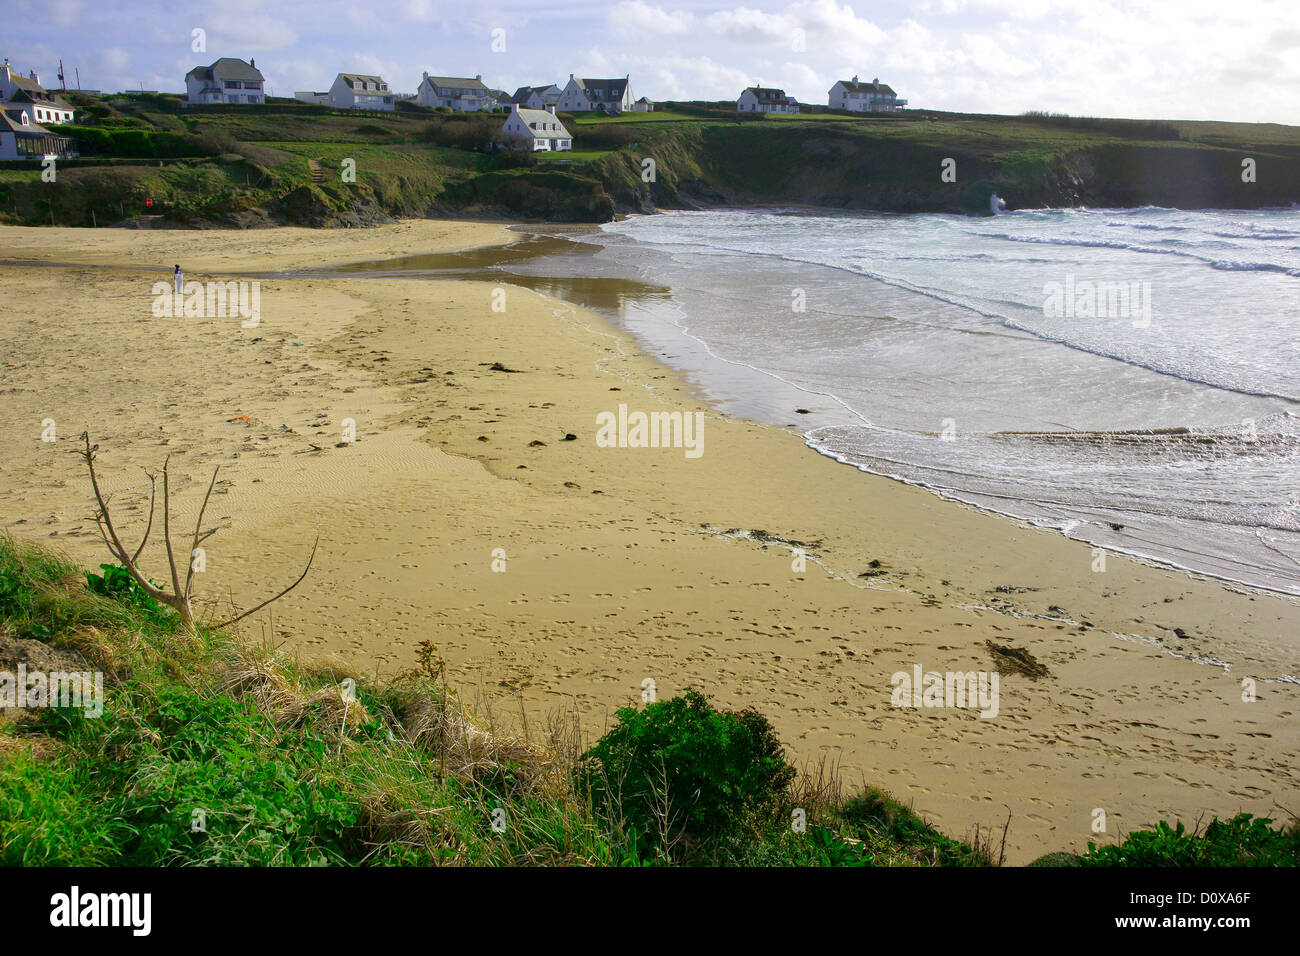 One of the seven beaches surrounding the coast at St Merryn, Cornwall. Stock Photo